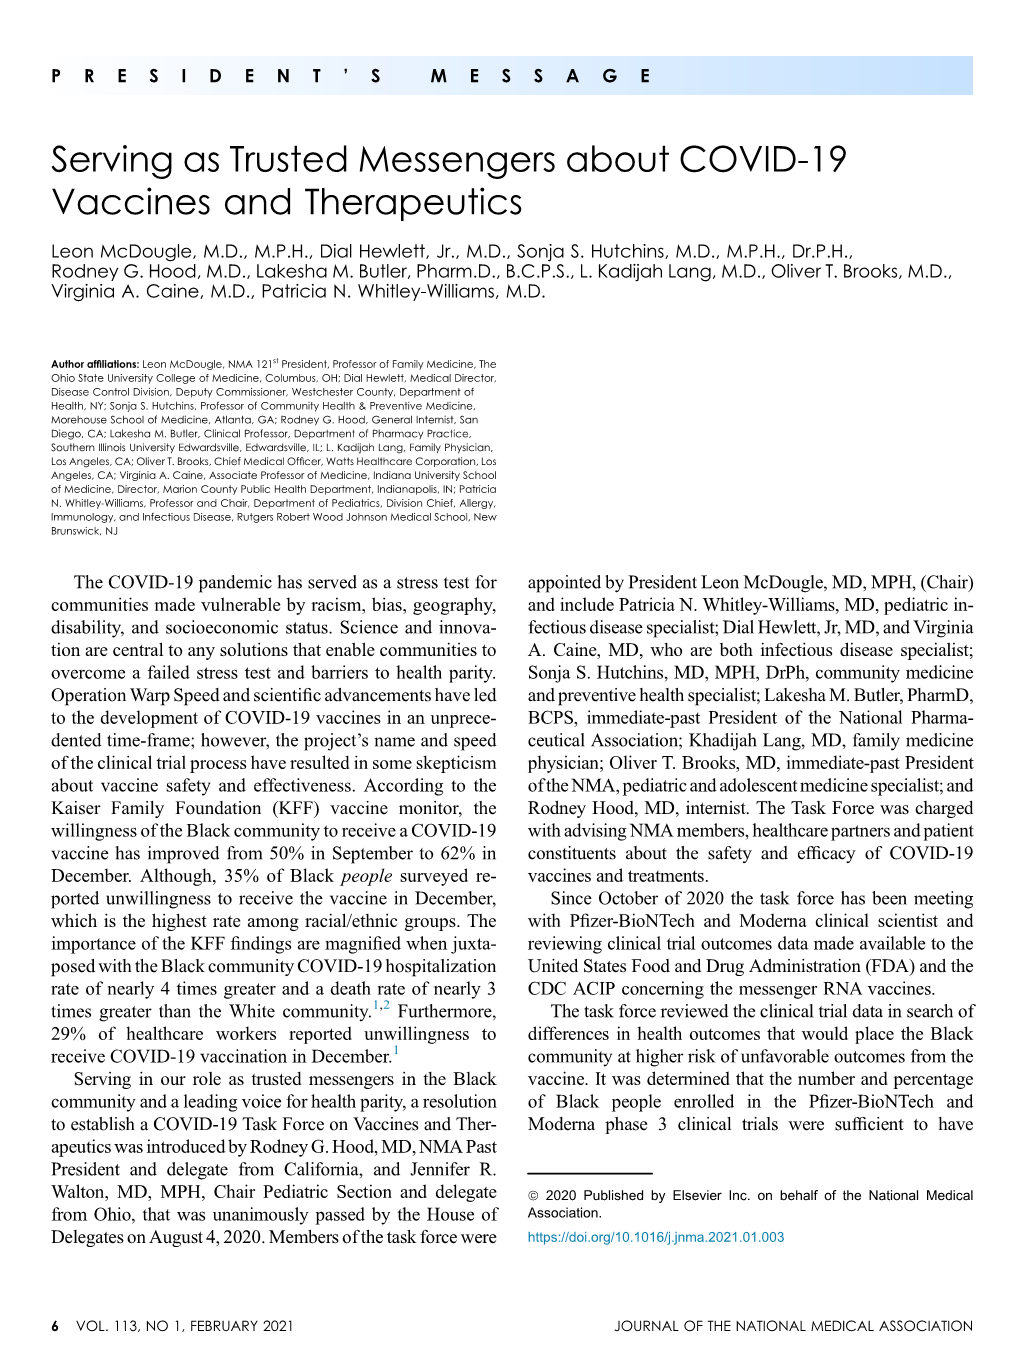 Serving As Trusted Messengers About COVID-19 Vaccines and Therapeutics